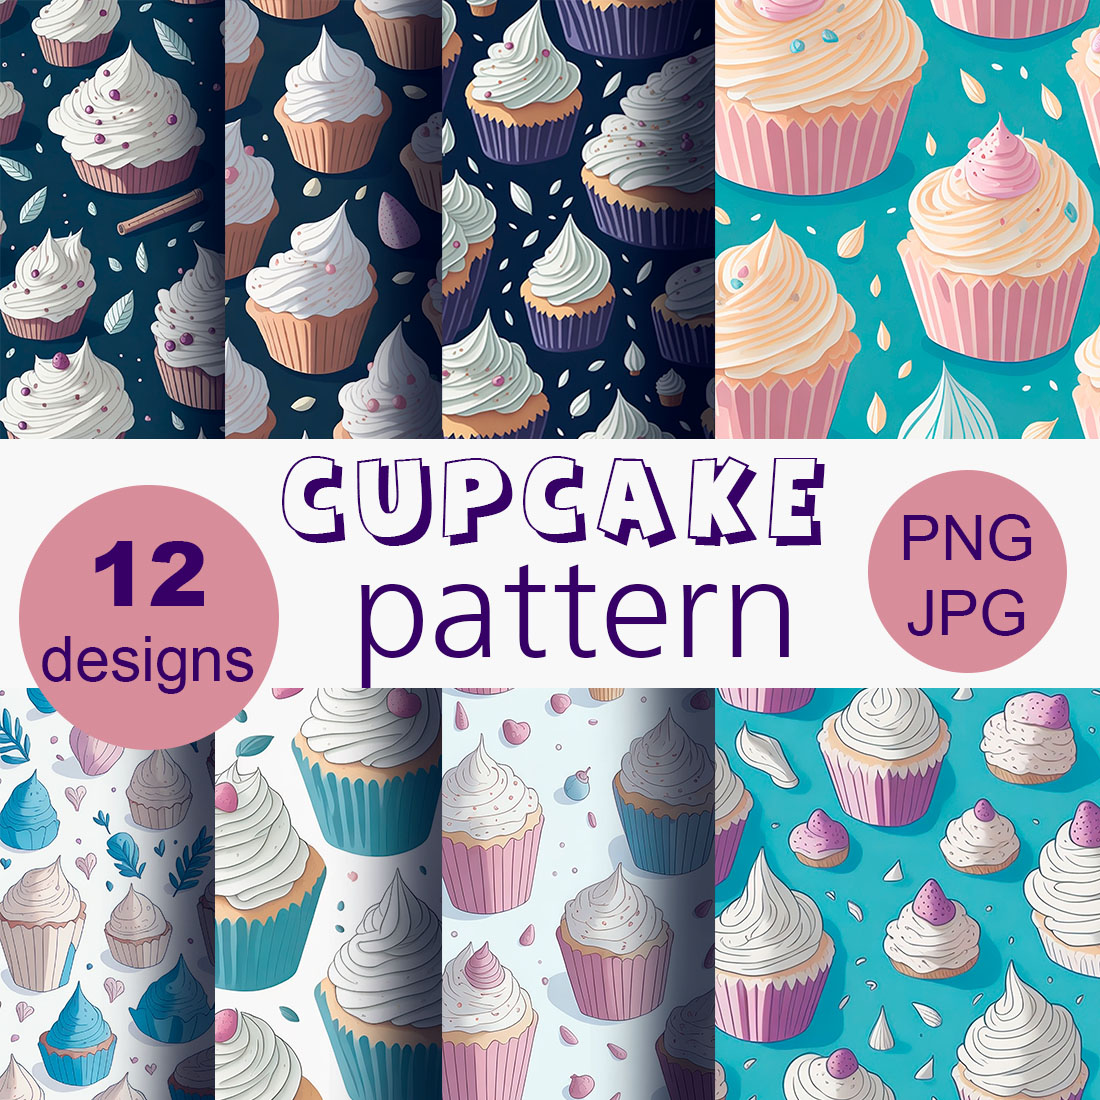 pattern cupcakes designs 12 pieces cover image.